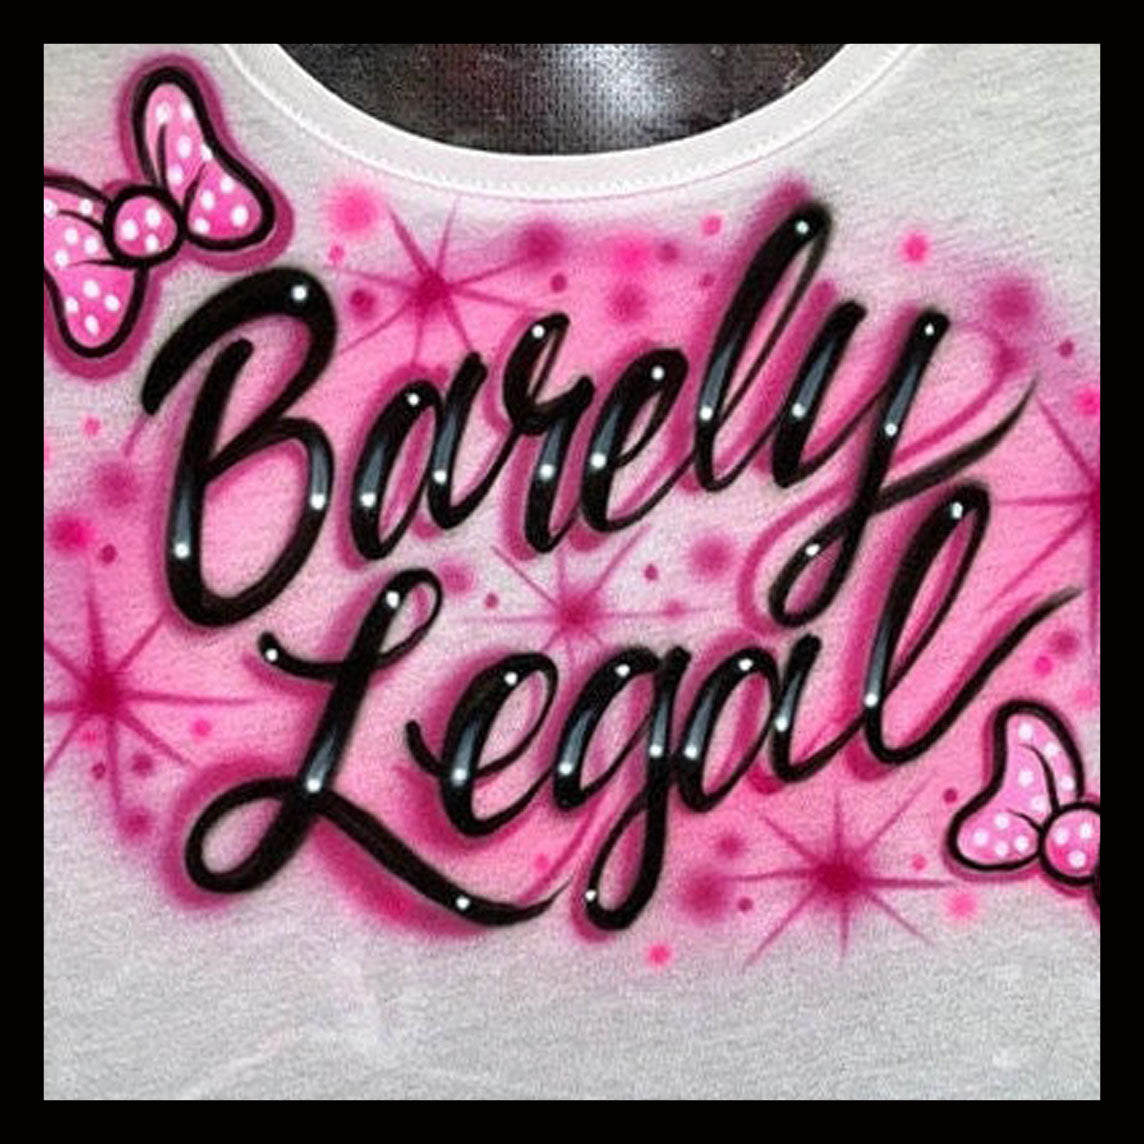 Airbrush T-Shirt - Barely Legal - Bows